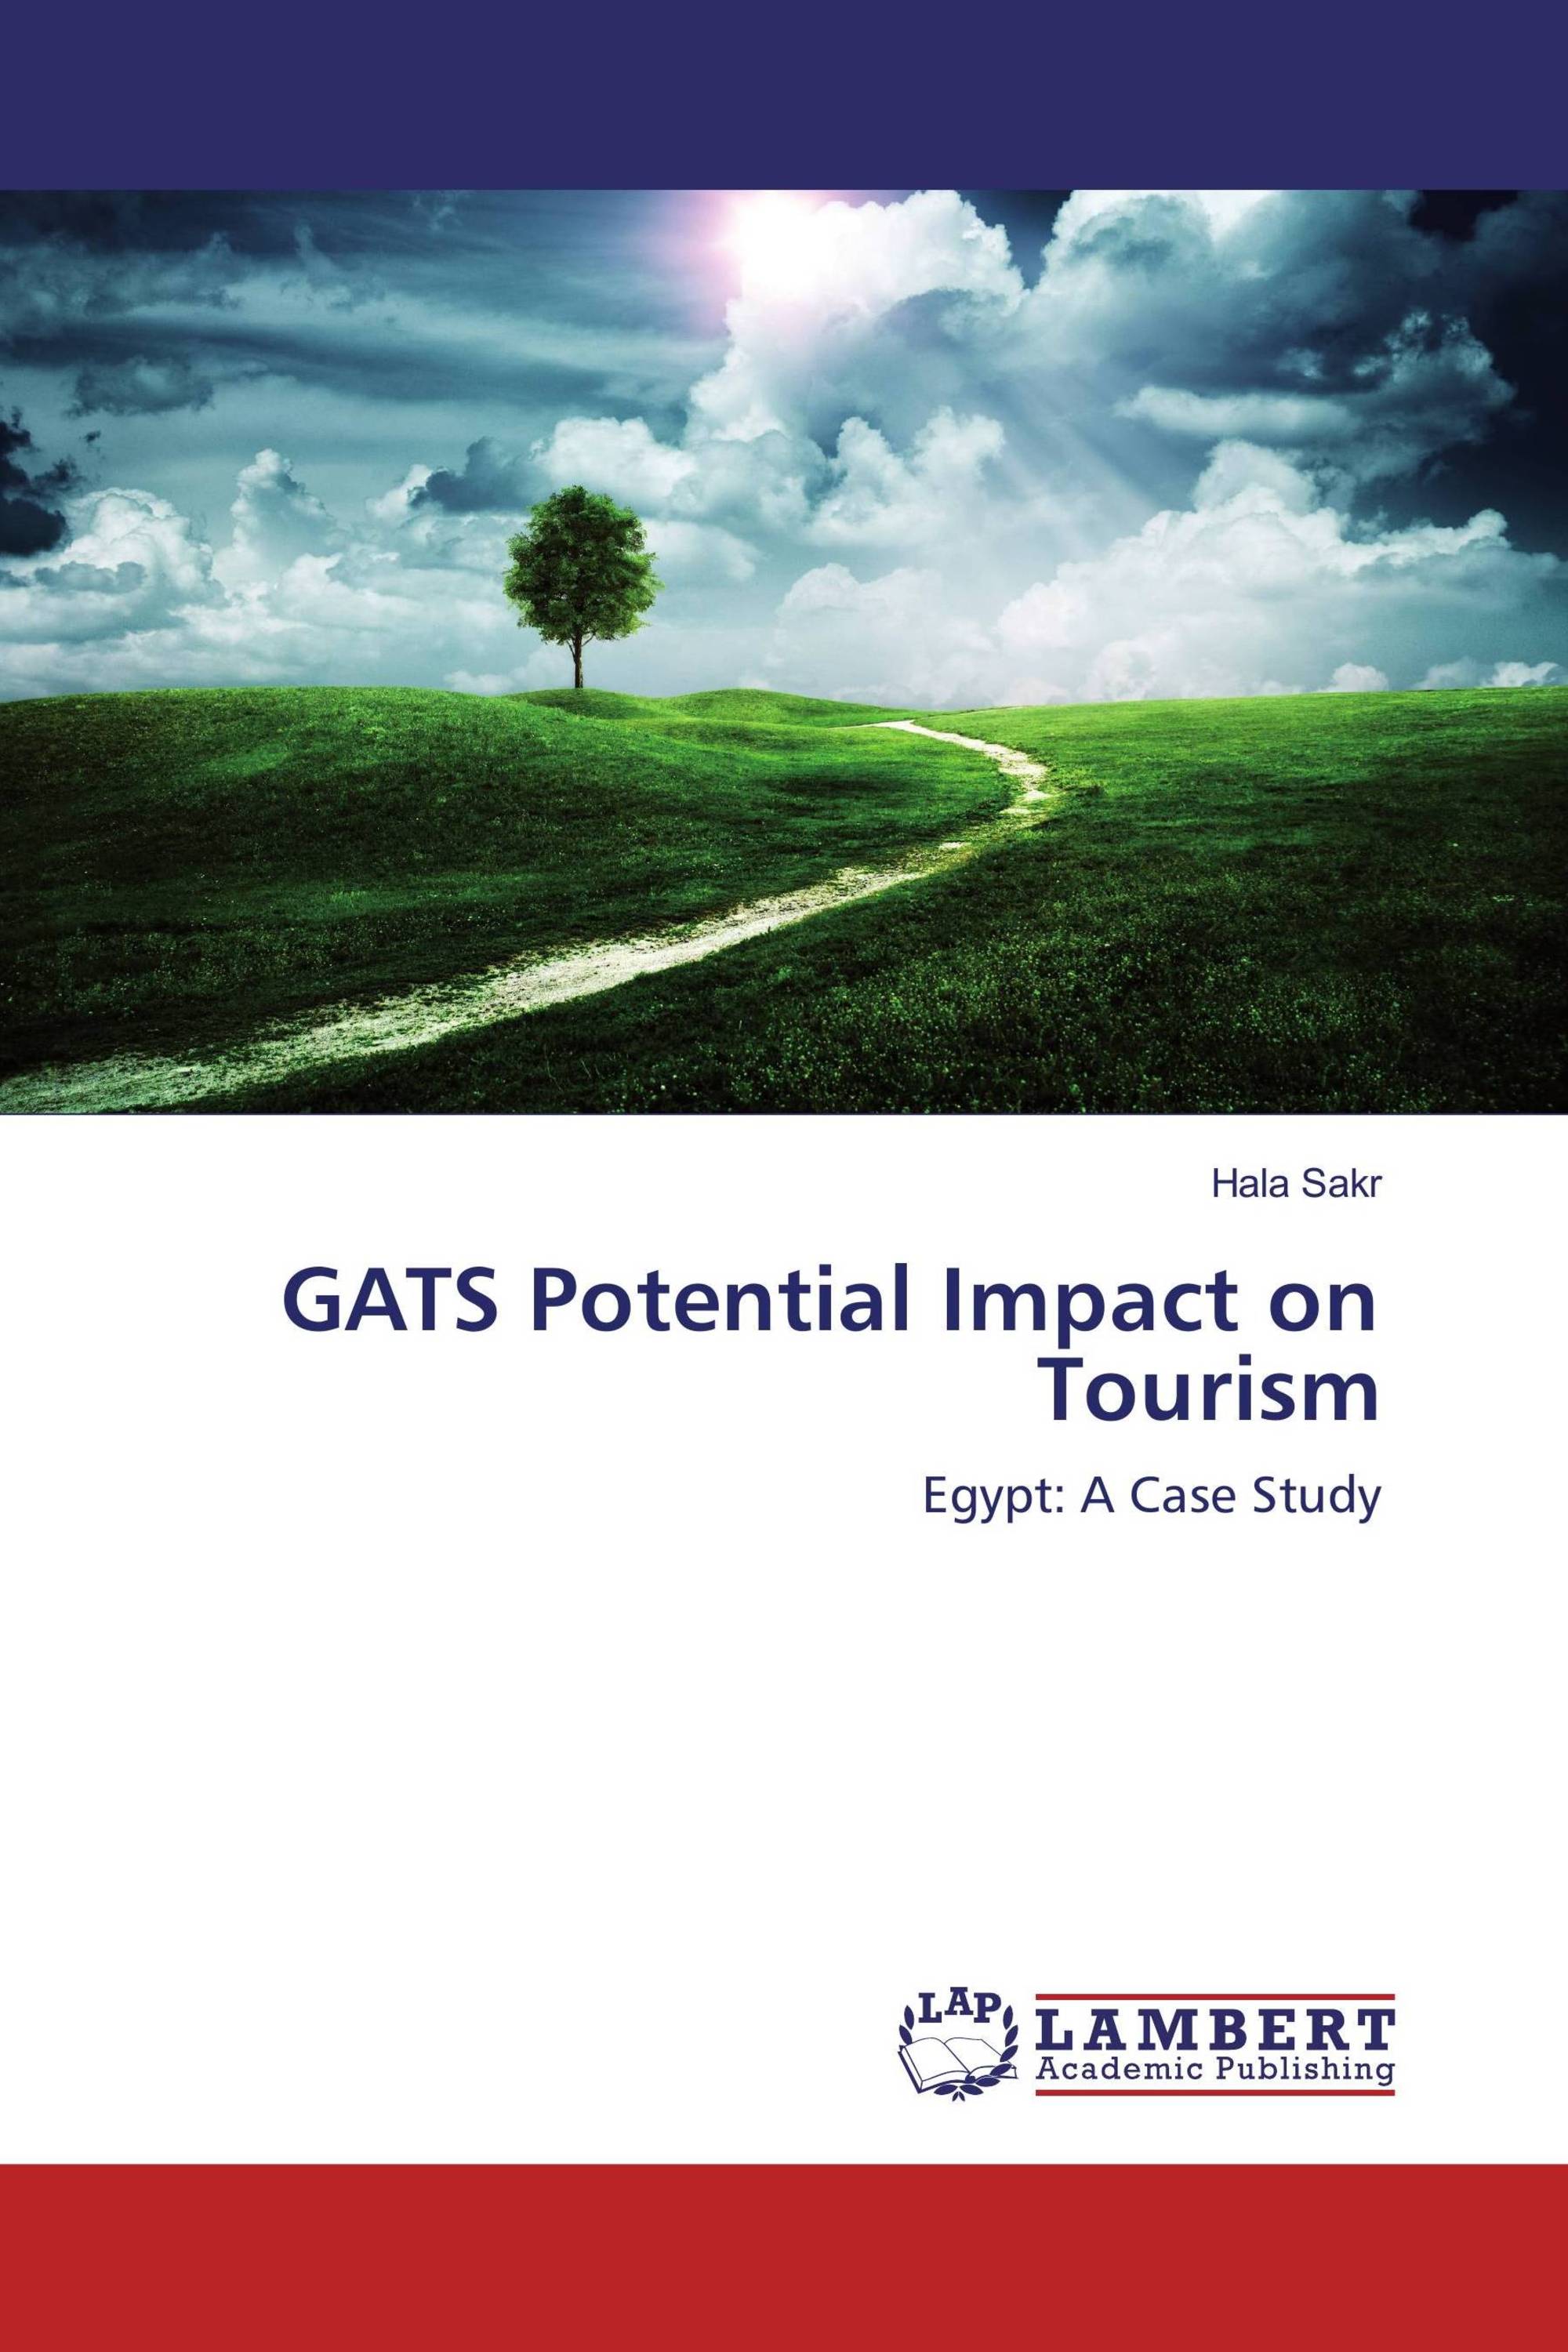 gats and tourism